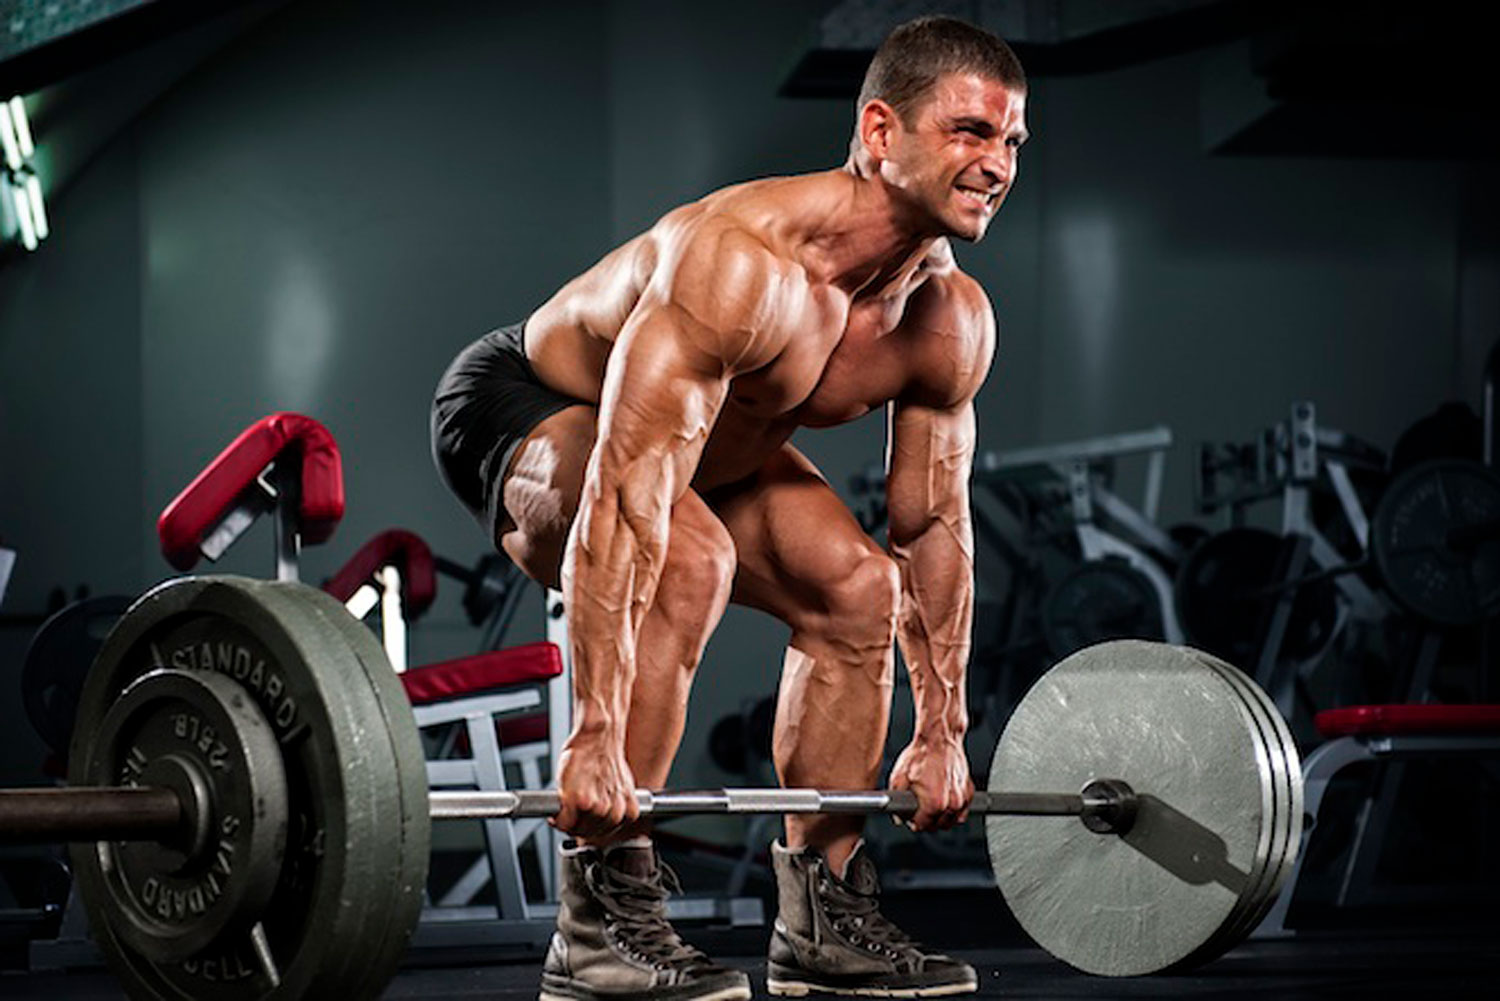 How To Perform A Deadlift Correctly To Avoid Injury